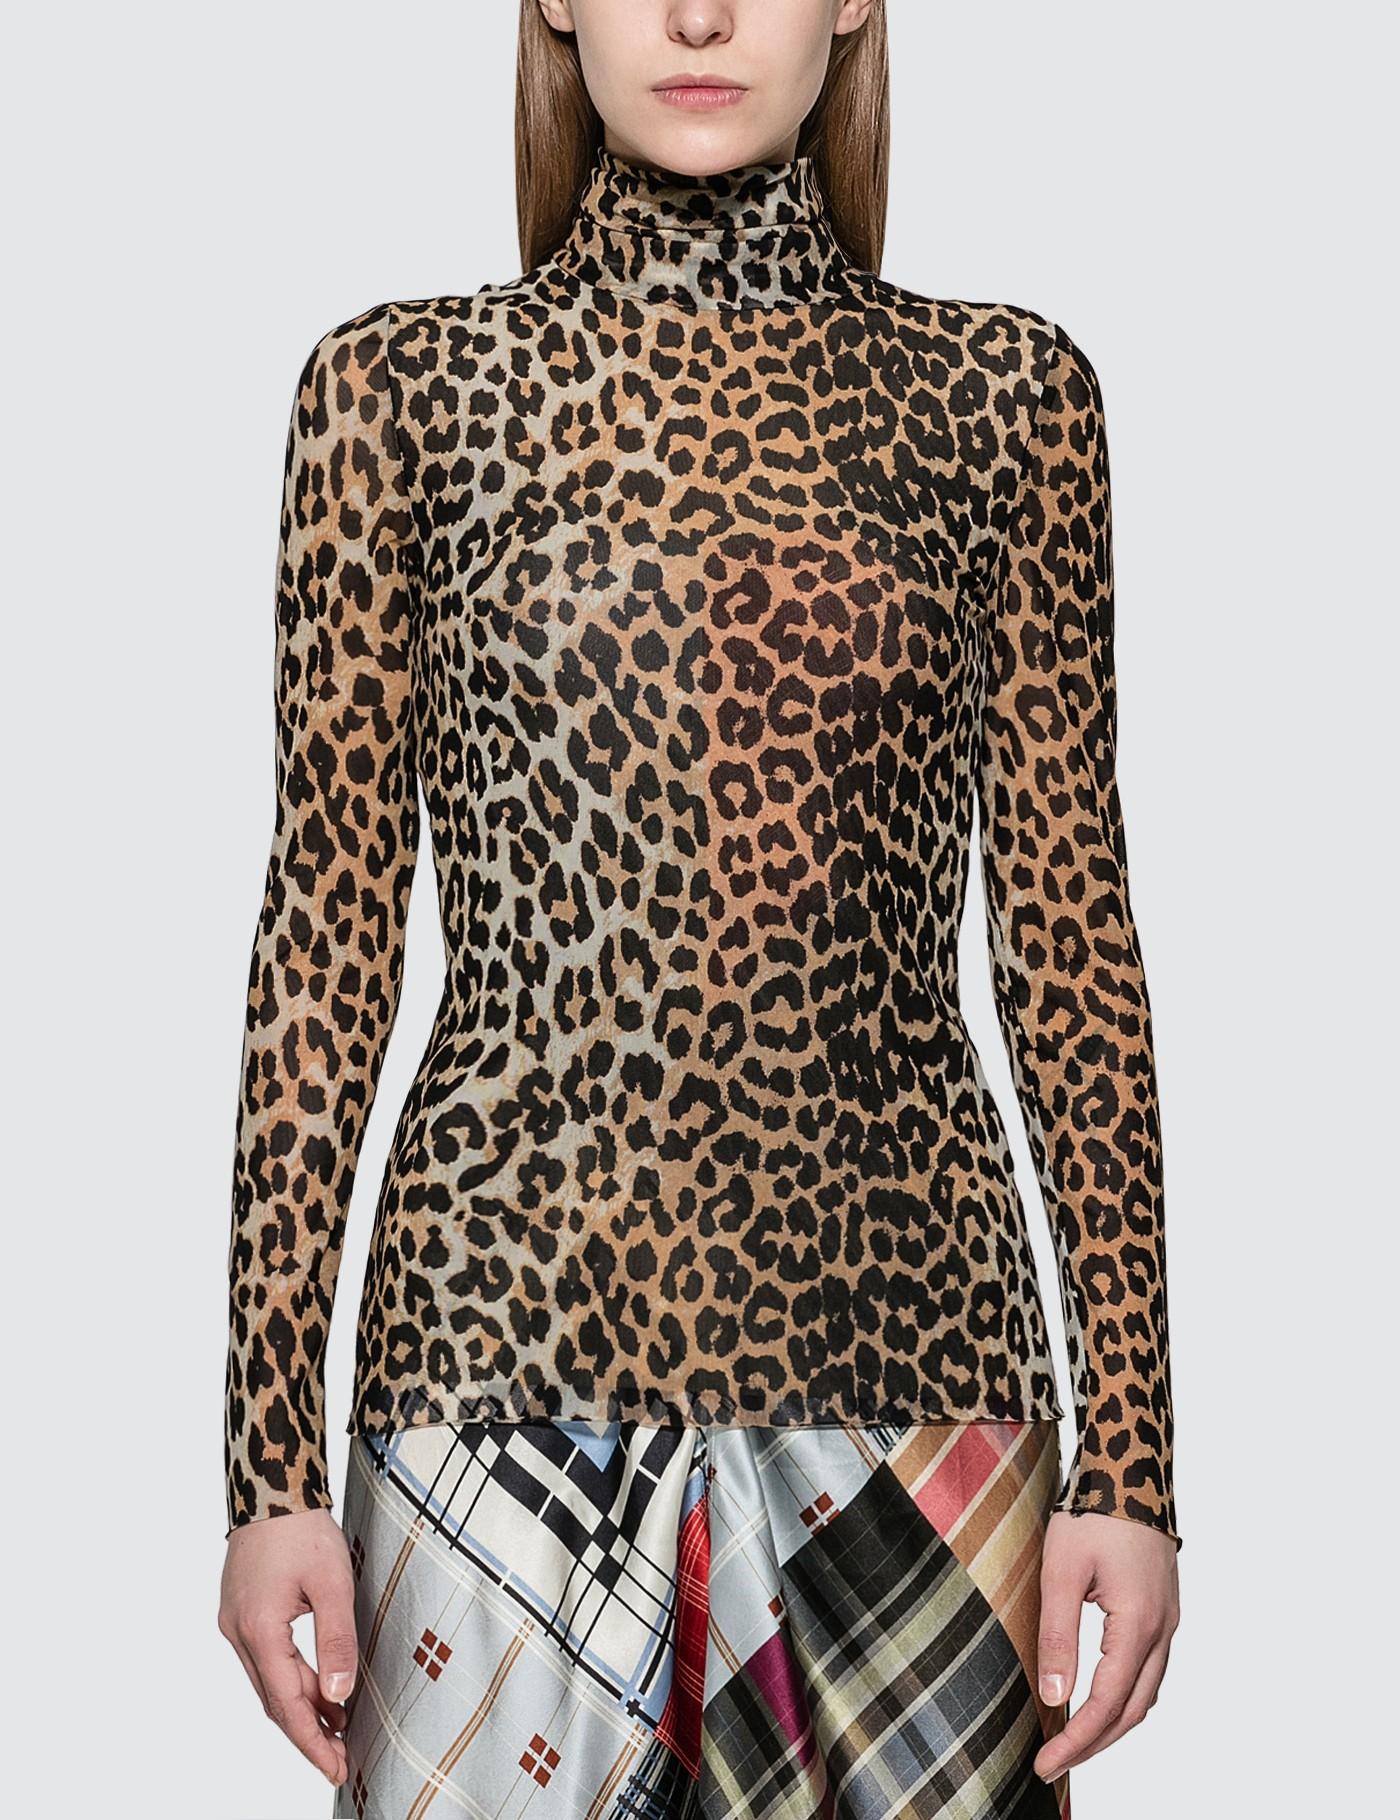 Ganni Synthetic Printed Mesh Leopard Turtleneck in Brown - Save 12% - Lyst